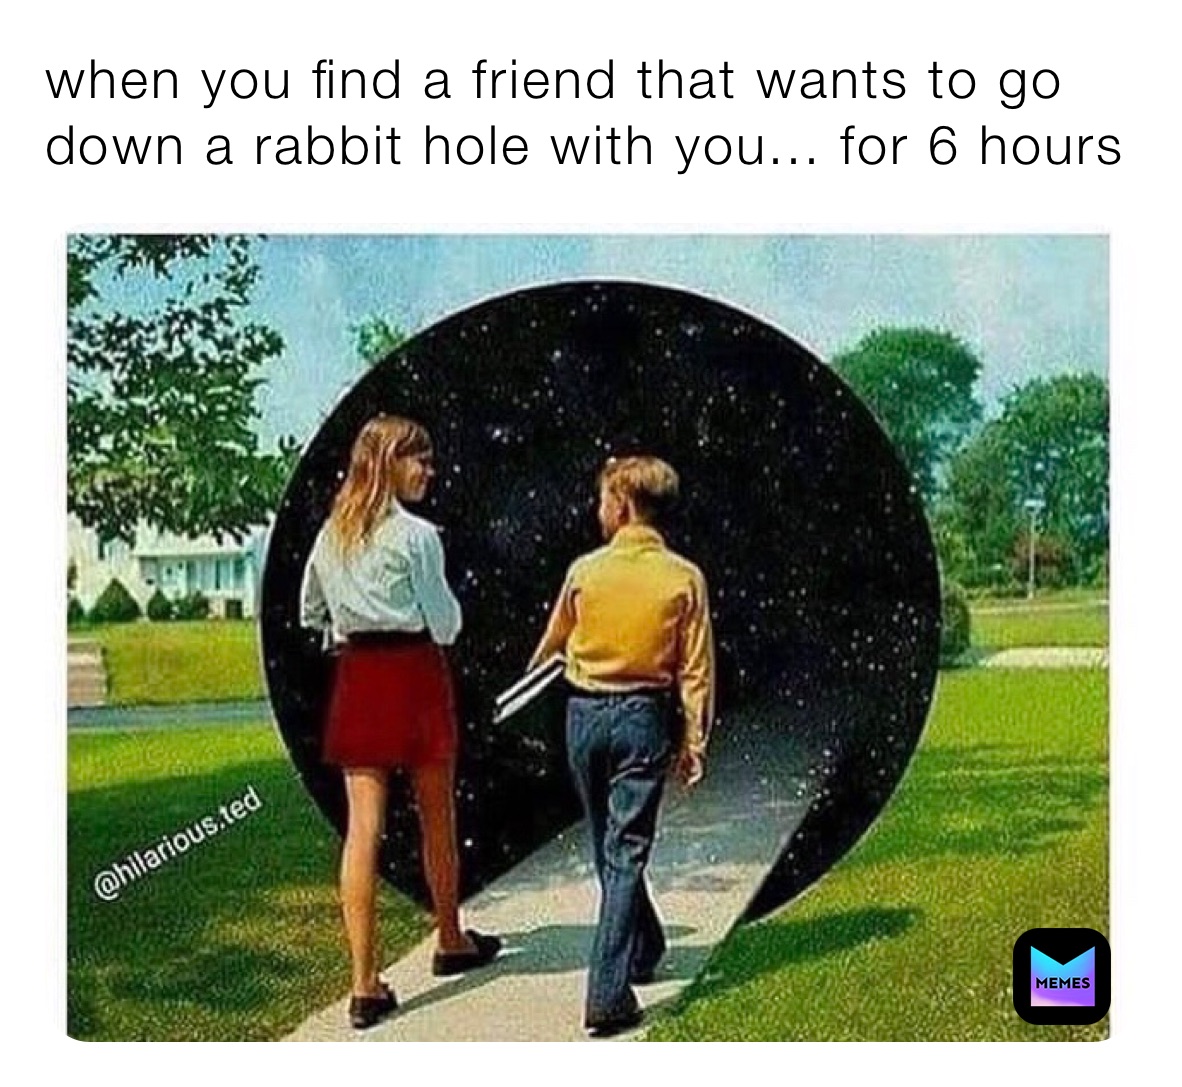 when you find a friend that wants to go down a rabbit hole with you... for 6 hours